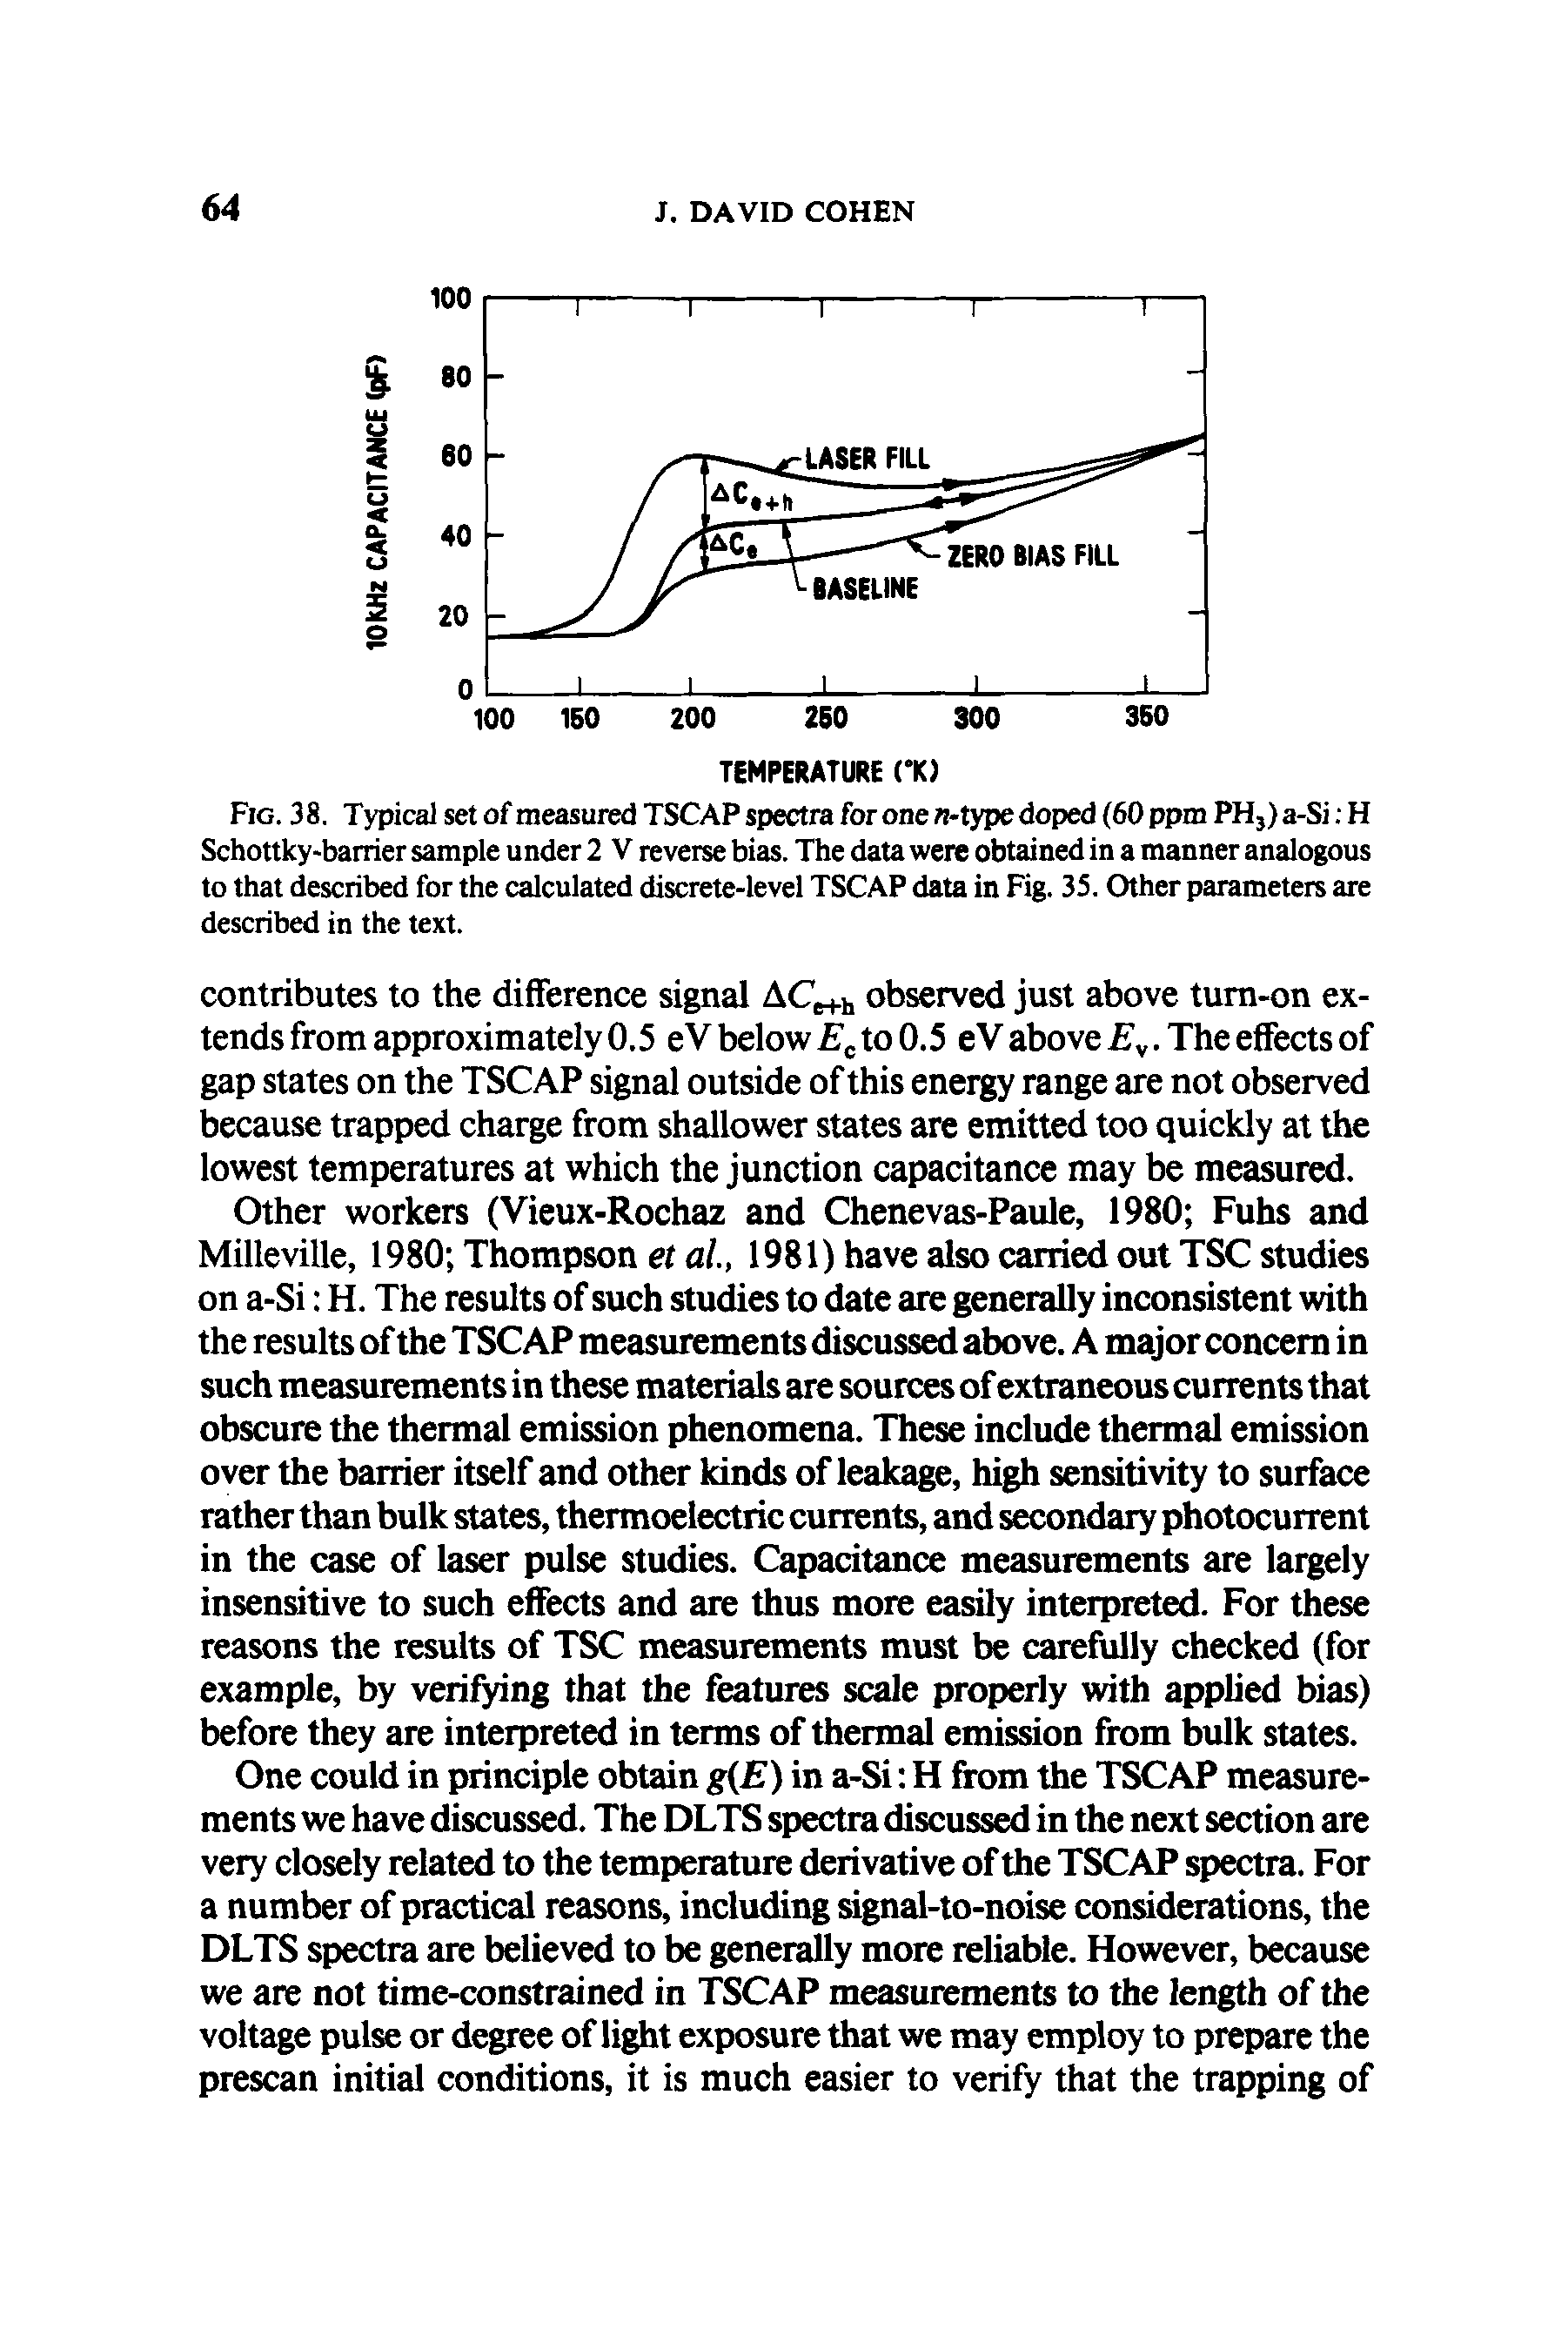 Fig. 38. Typical set of measured TSCAP spectra for one n-type doped (60 ppm PHj) a-Si H Schottky-barrier sample under 2 V reverse bias. The data were obtained in a manner analogous to that described for the calculated discrete-level TSCAP data in Fig. 35. Other parameters are described in the text.